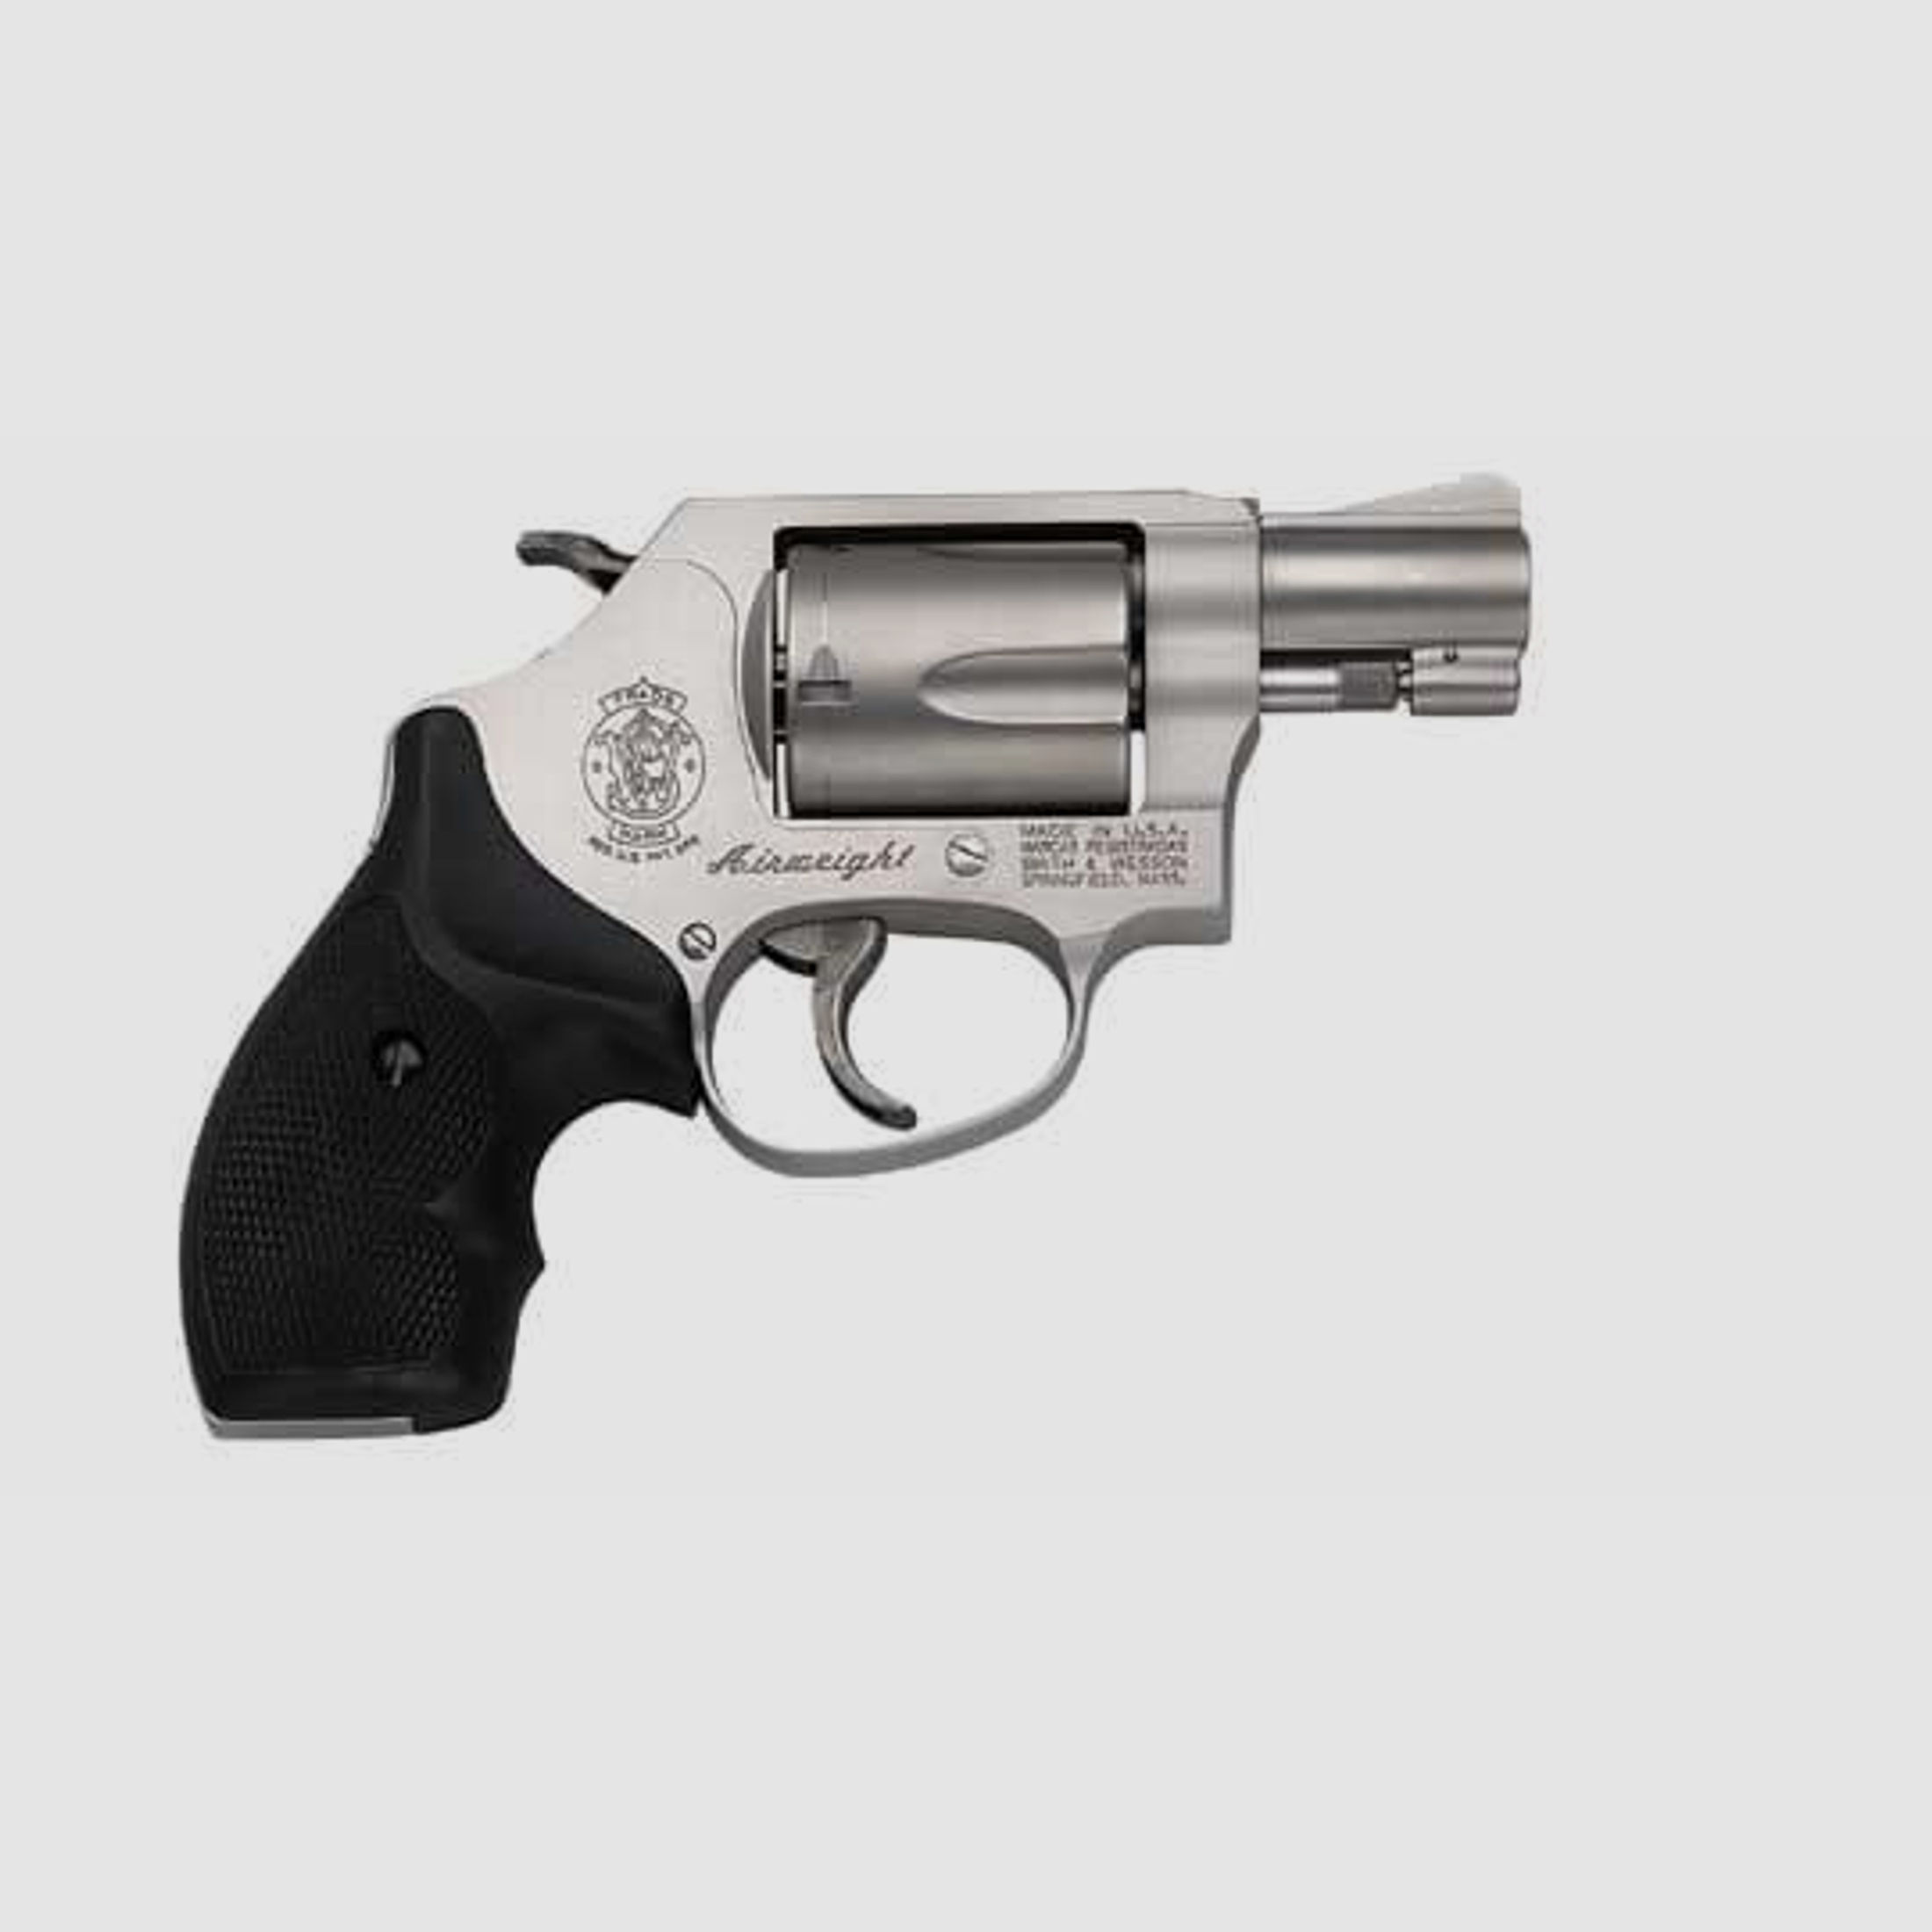 SMITH & WESSON Revolver Mod. 637 -1 7/8' Airweight .38Special